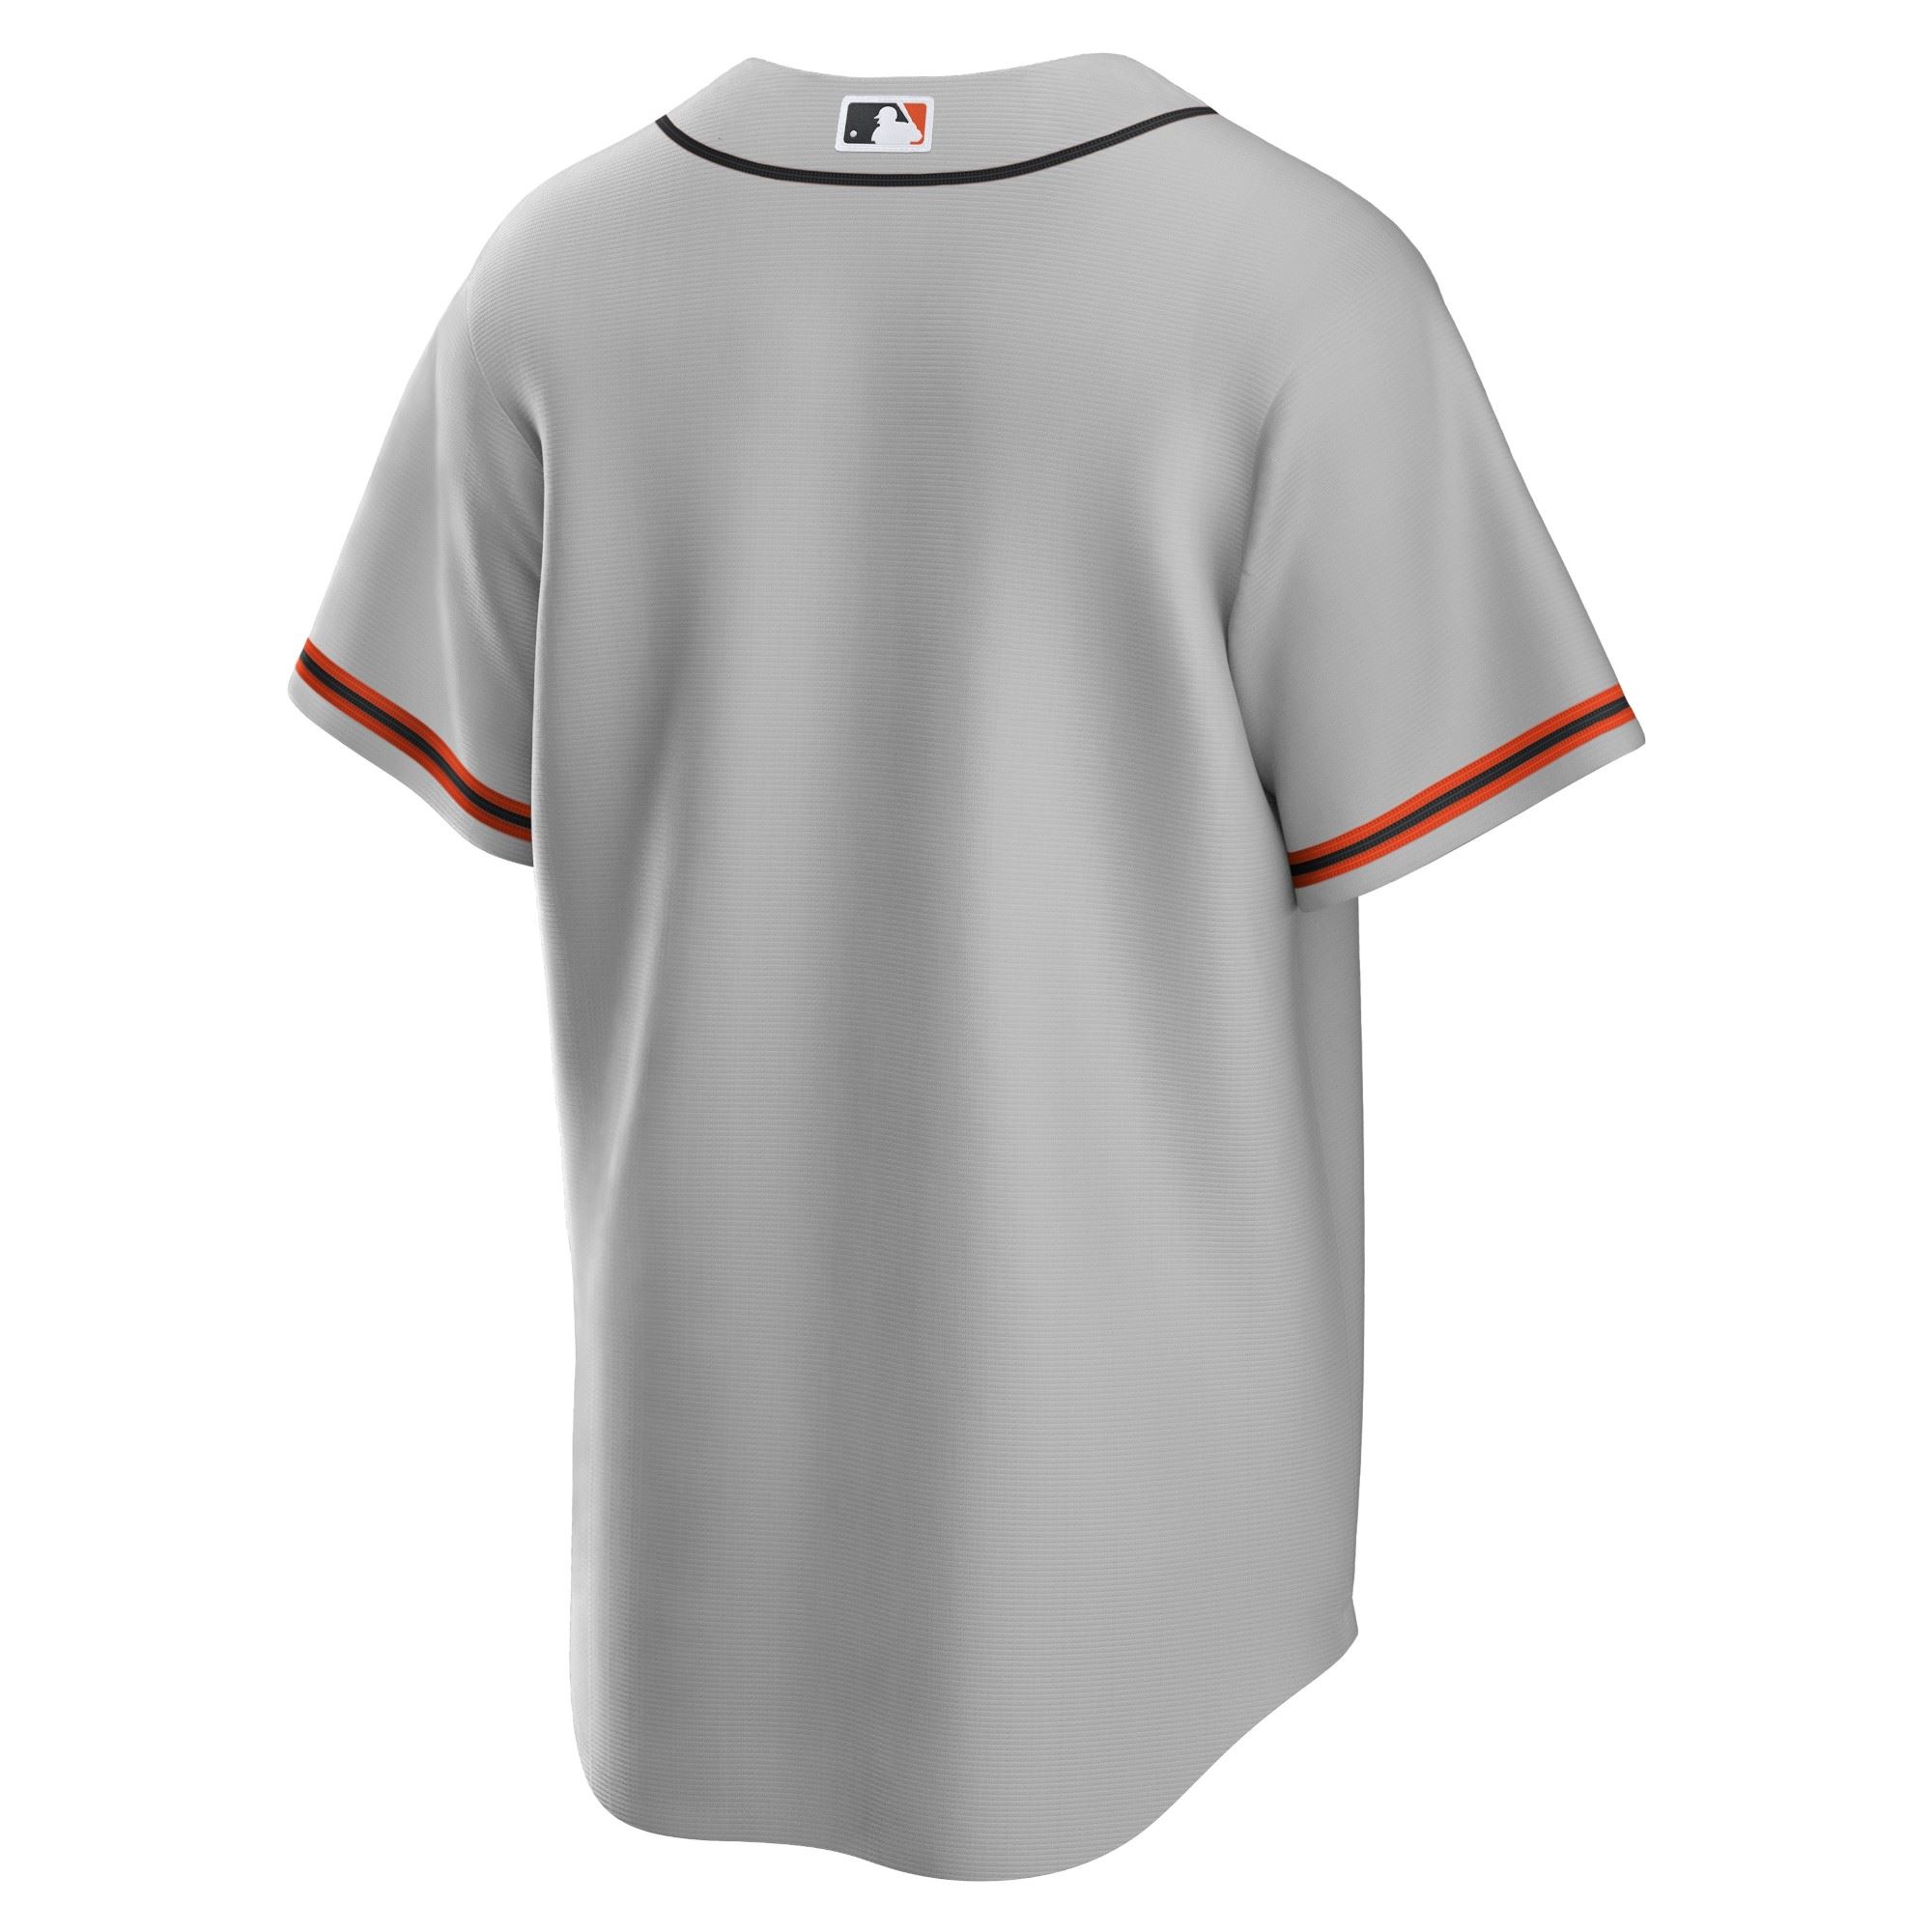 San Francisco Giants Gray Official MLB Replica Road Jersey Nike